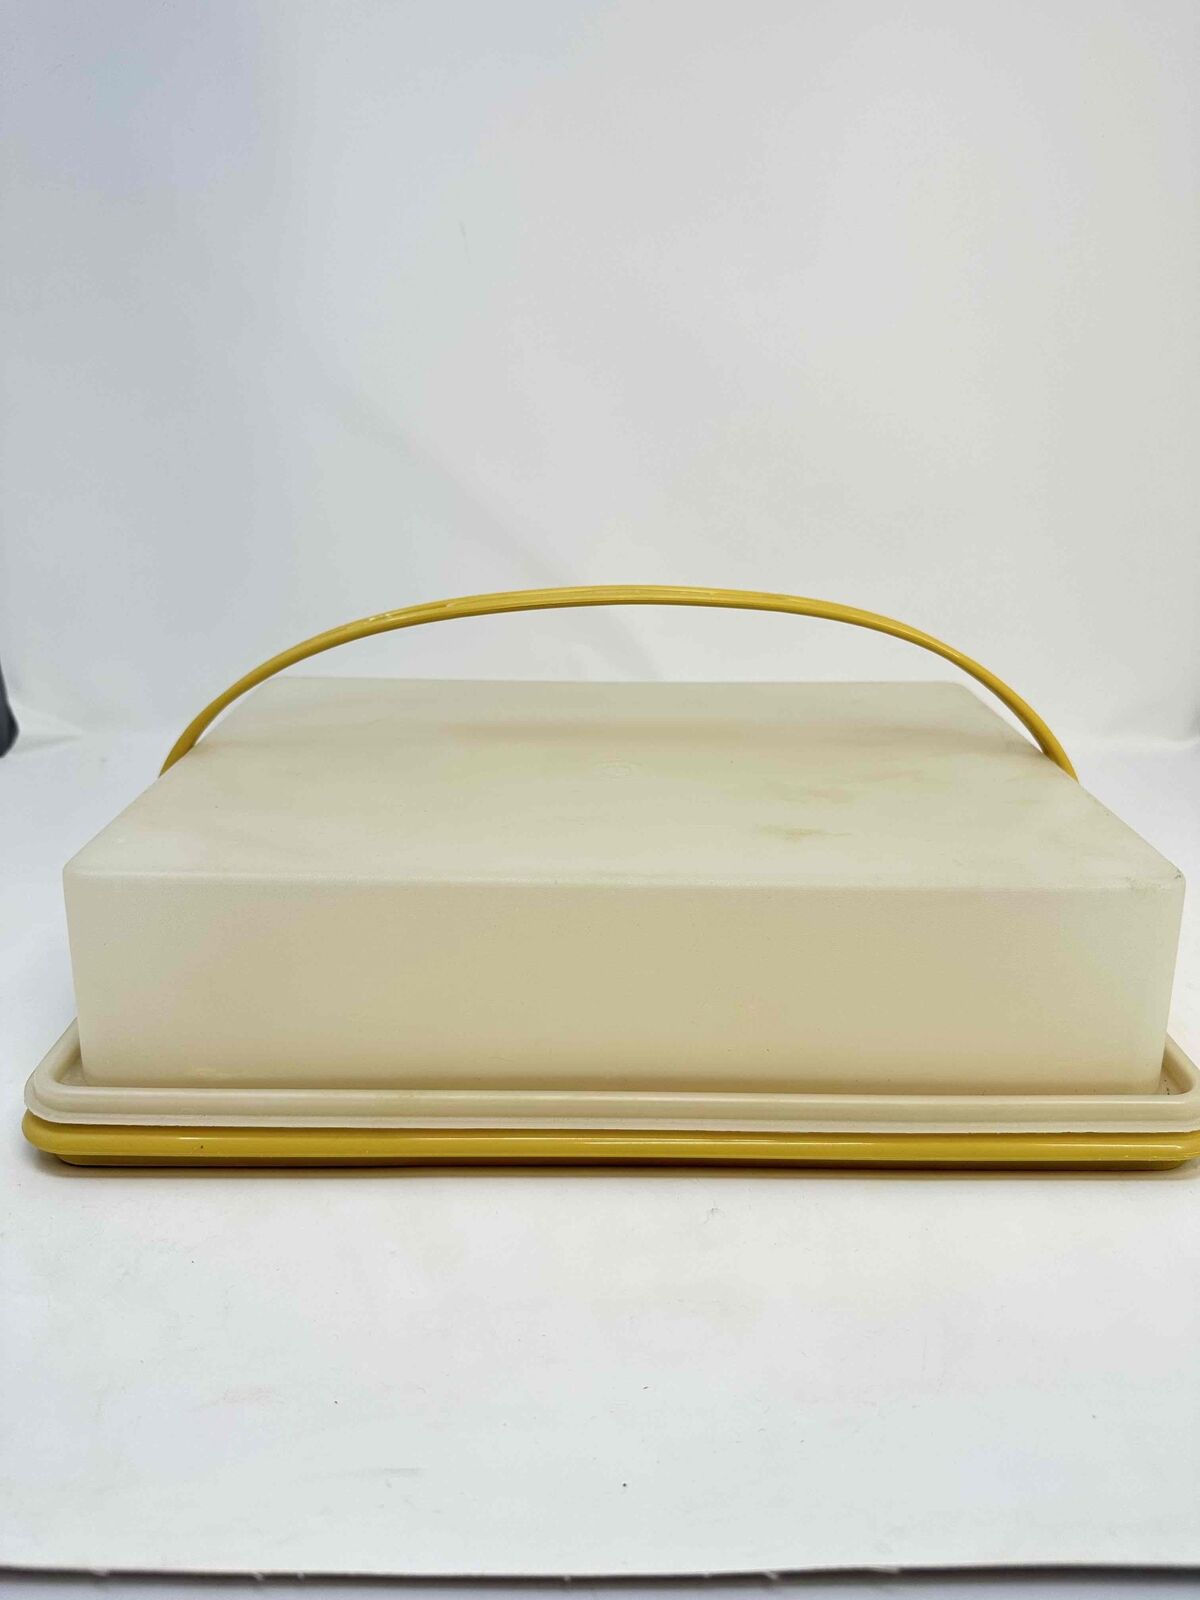 Vintage Tupperware Sheet Cake Carrier w/ Lid and handle 624-14 Harvest Gold 9x13